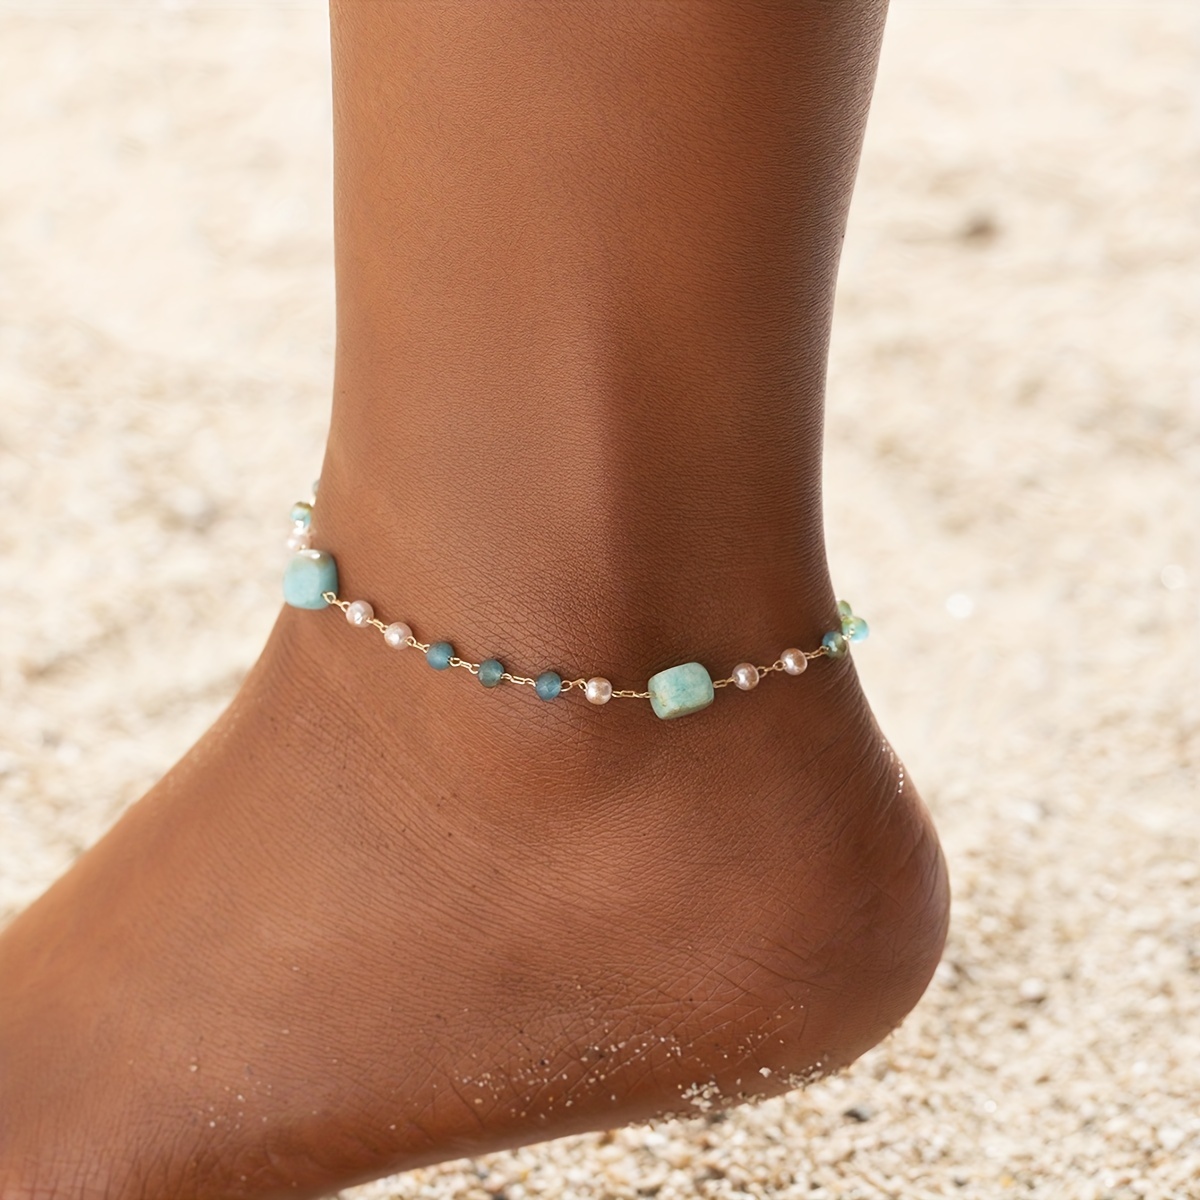 

Women's Natural Stone Imitation Pearl Anklet 14k Plated Foot Jewelry Chain